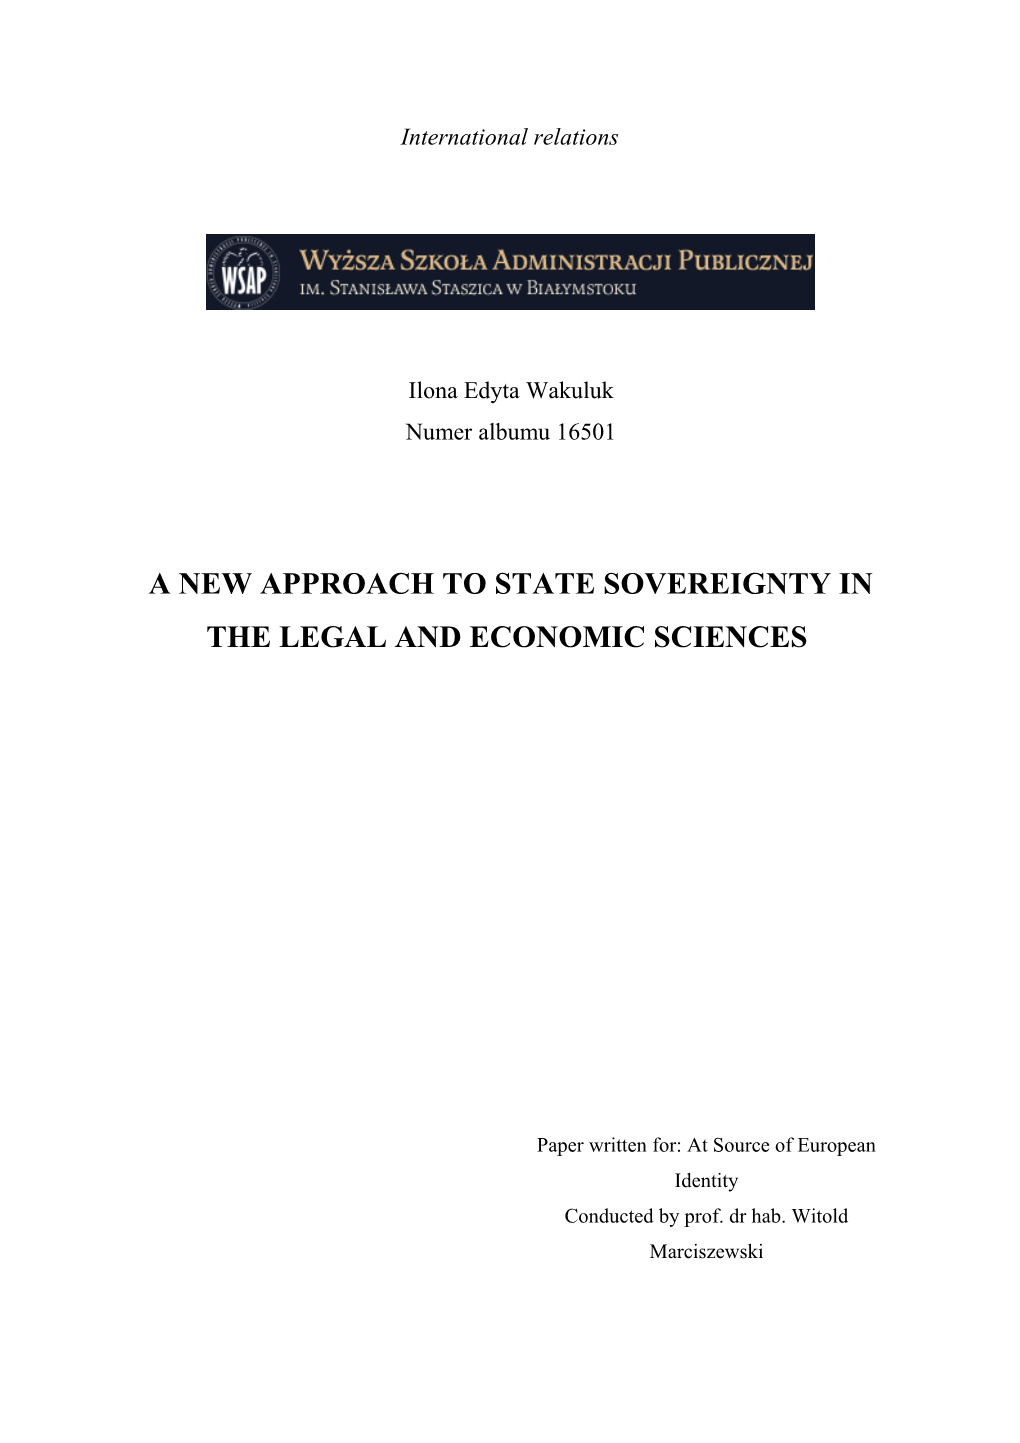 A New Approach to State Sovereignty in the Legal and Economic Sciences